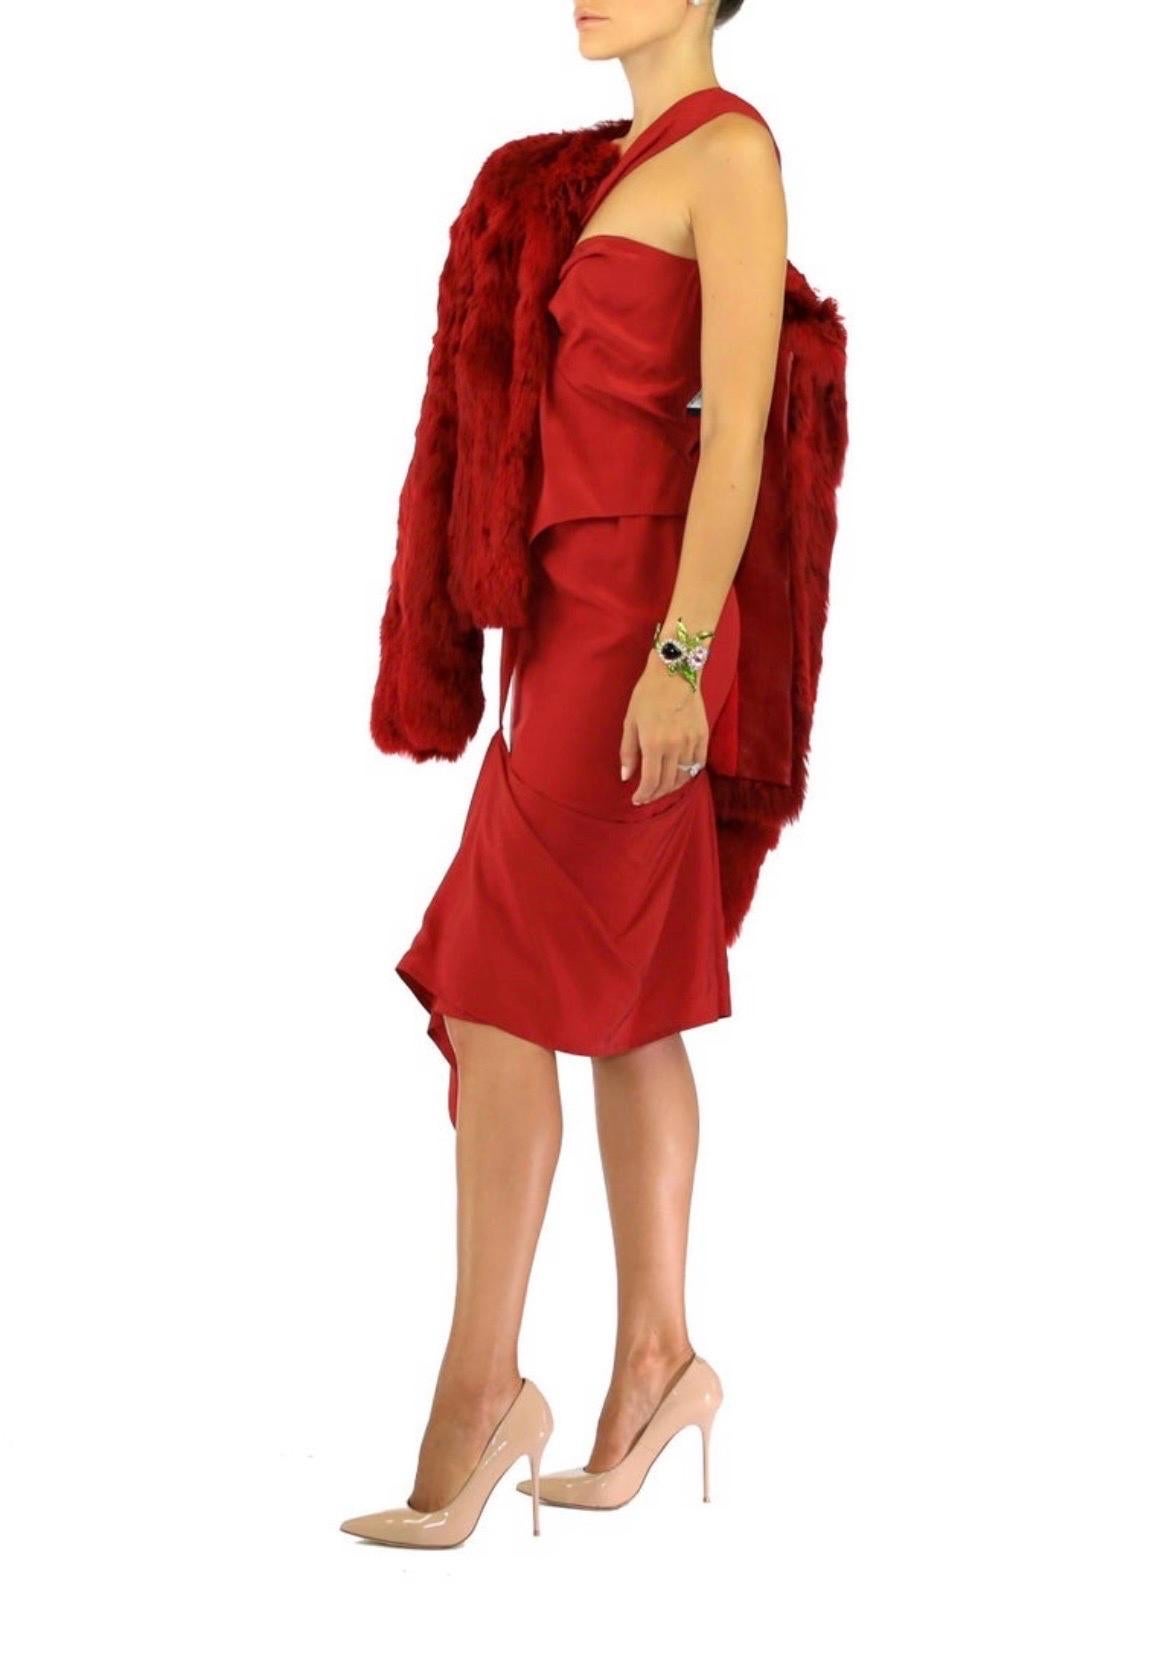 F/W 2003 Vintage Tom Ford for Yves Saint Laurent Red Silk Dress For Sale 3